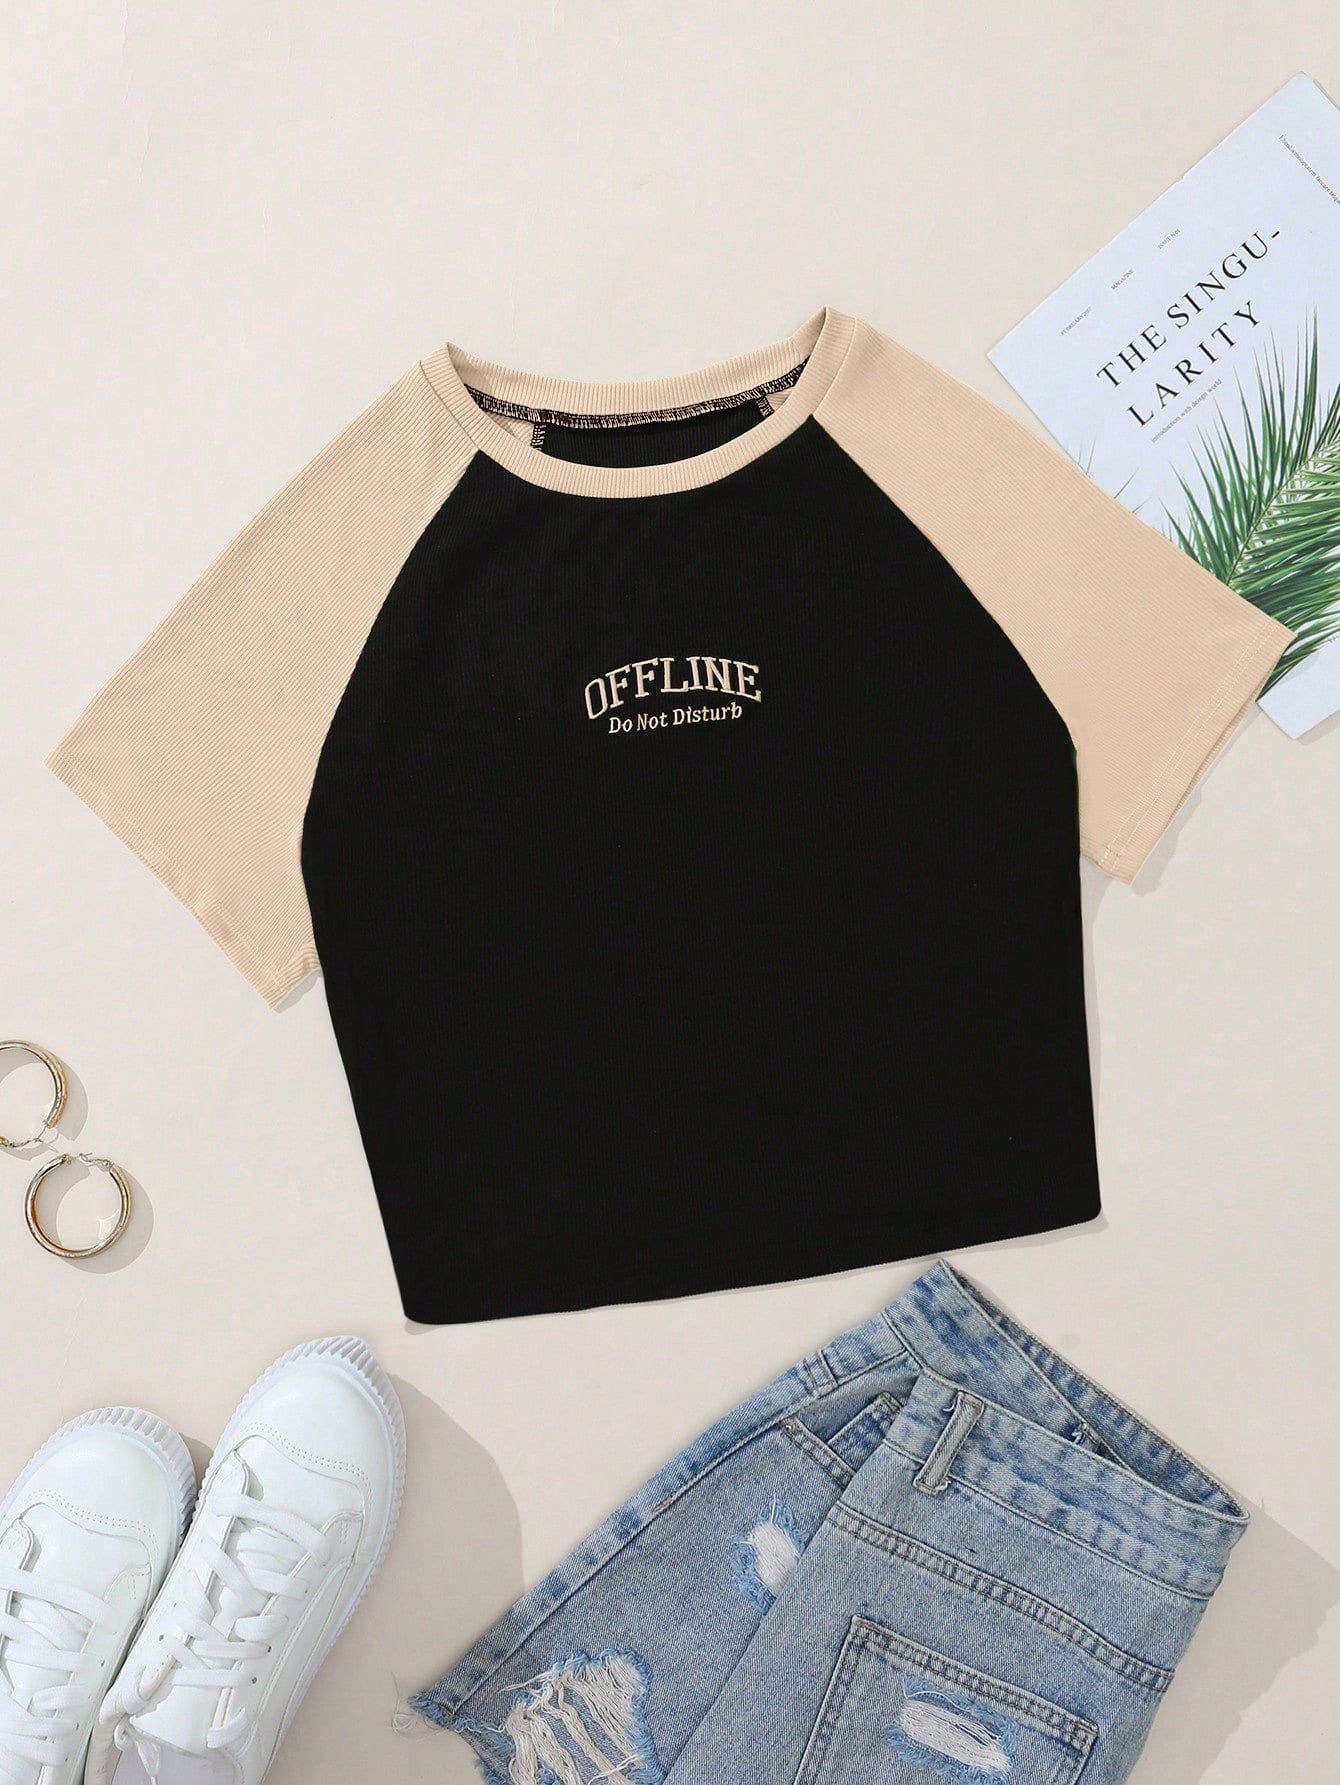 Plus Size Summer Casual T-Shirt With Letter Print, Color Block And Raglan Sleeve Design